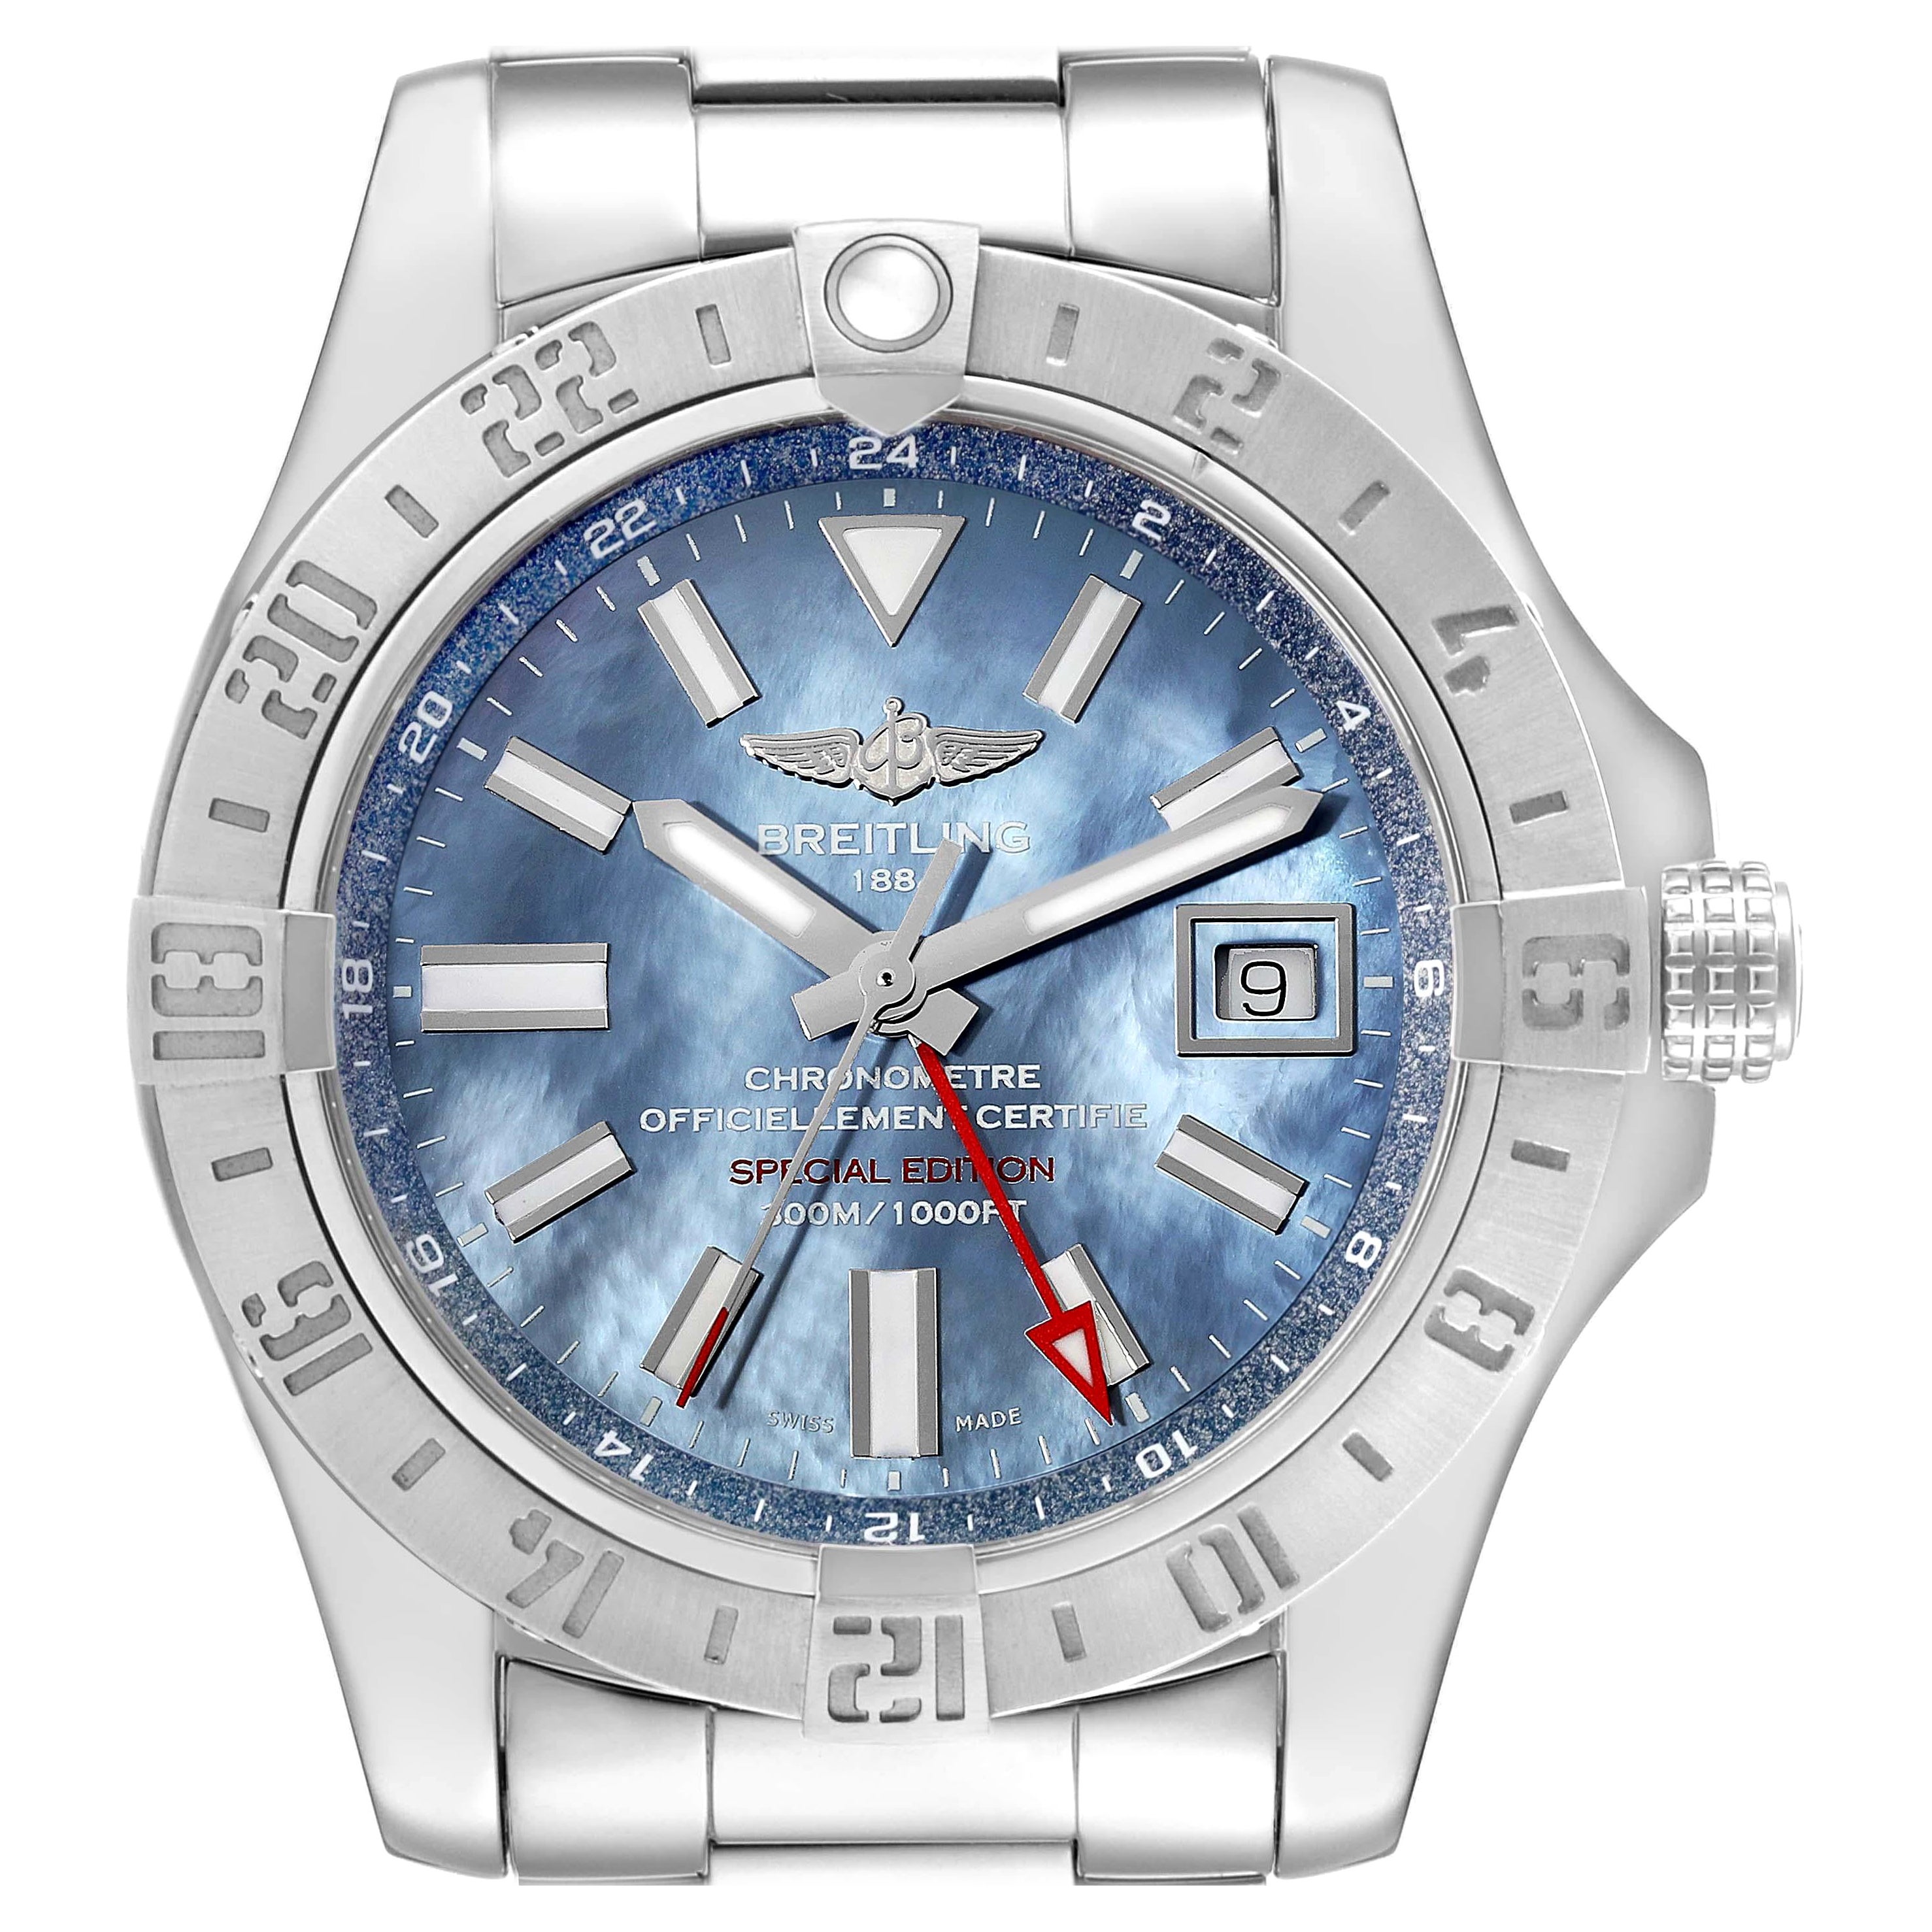 Breitling Avenger II GMT Blue Mother Of Pearl Dial Steel Mens Watch A32390 